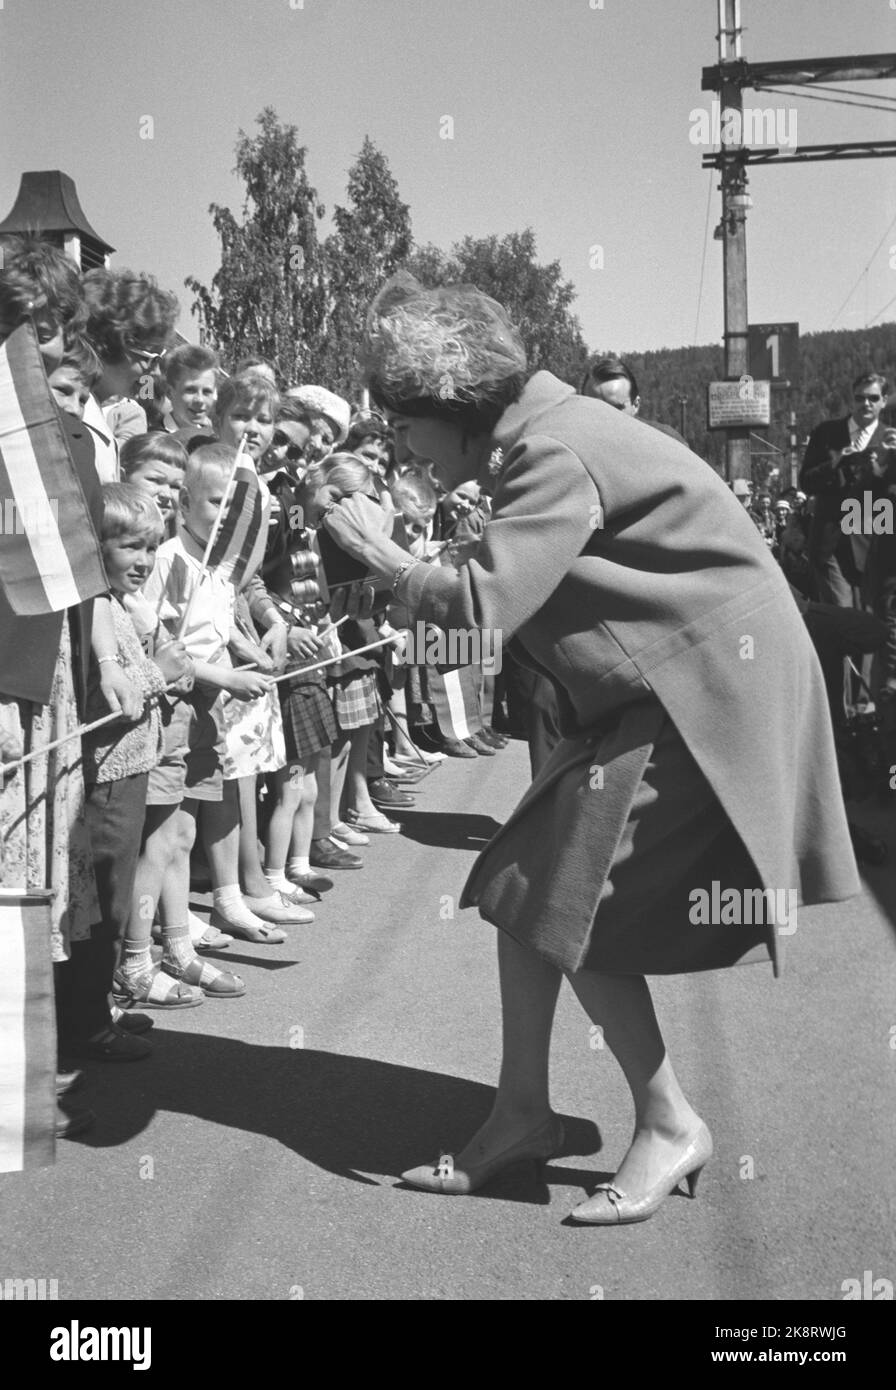 Norway on May 27, 1961. The Shah of Persia (Iran) with Queen Farah Diba, visits Norway. Here the Queen has found the film apparatus and shoots loose at Norwegian spectators, children and adults. Photo: Current / NTB Stock Photo